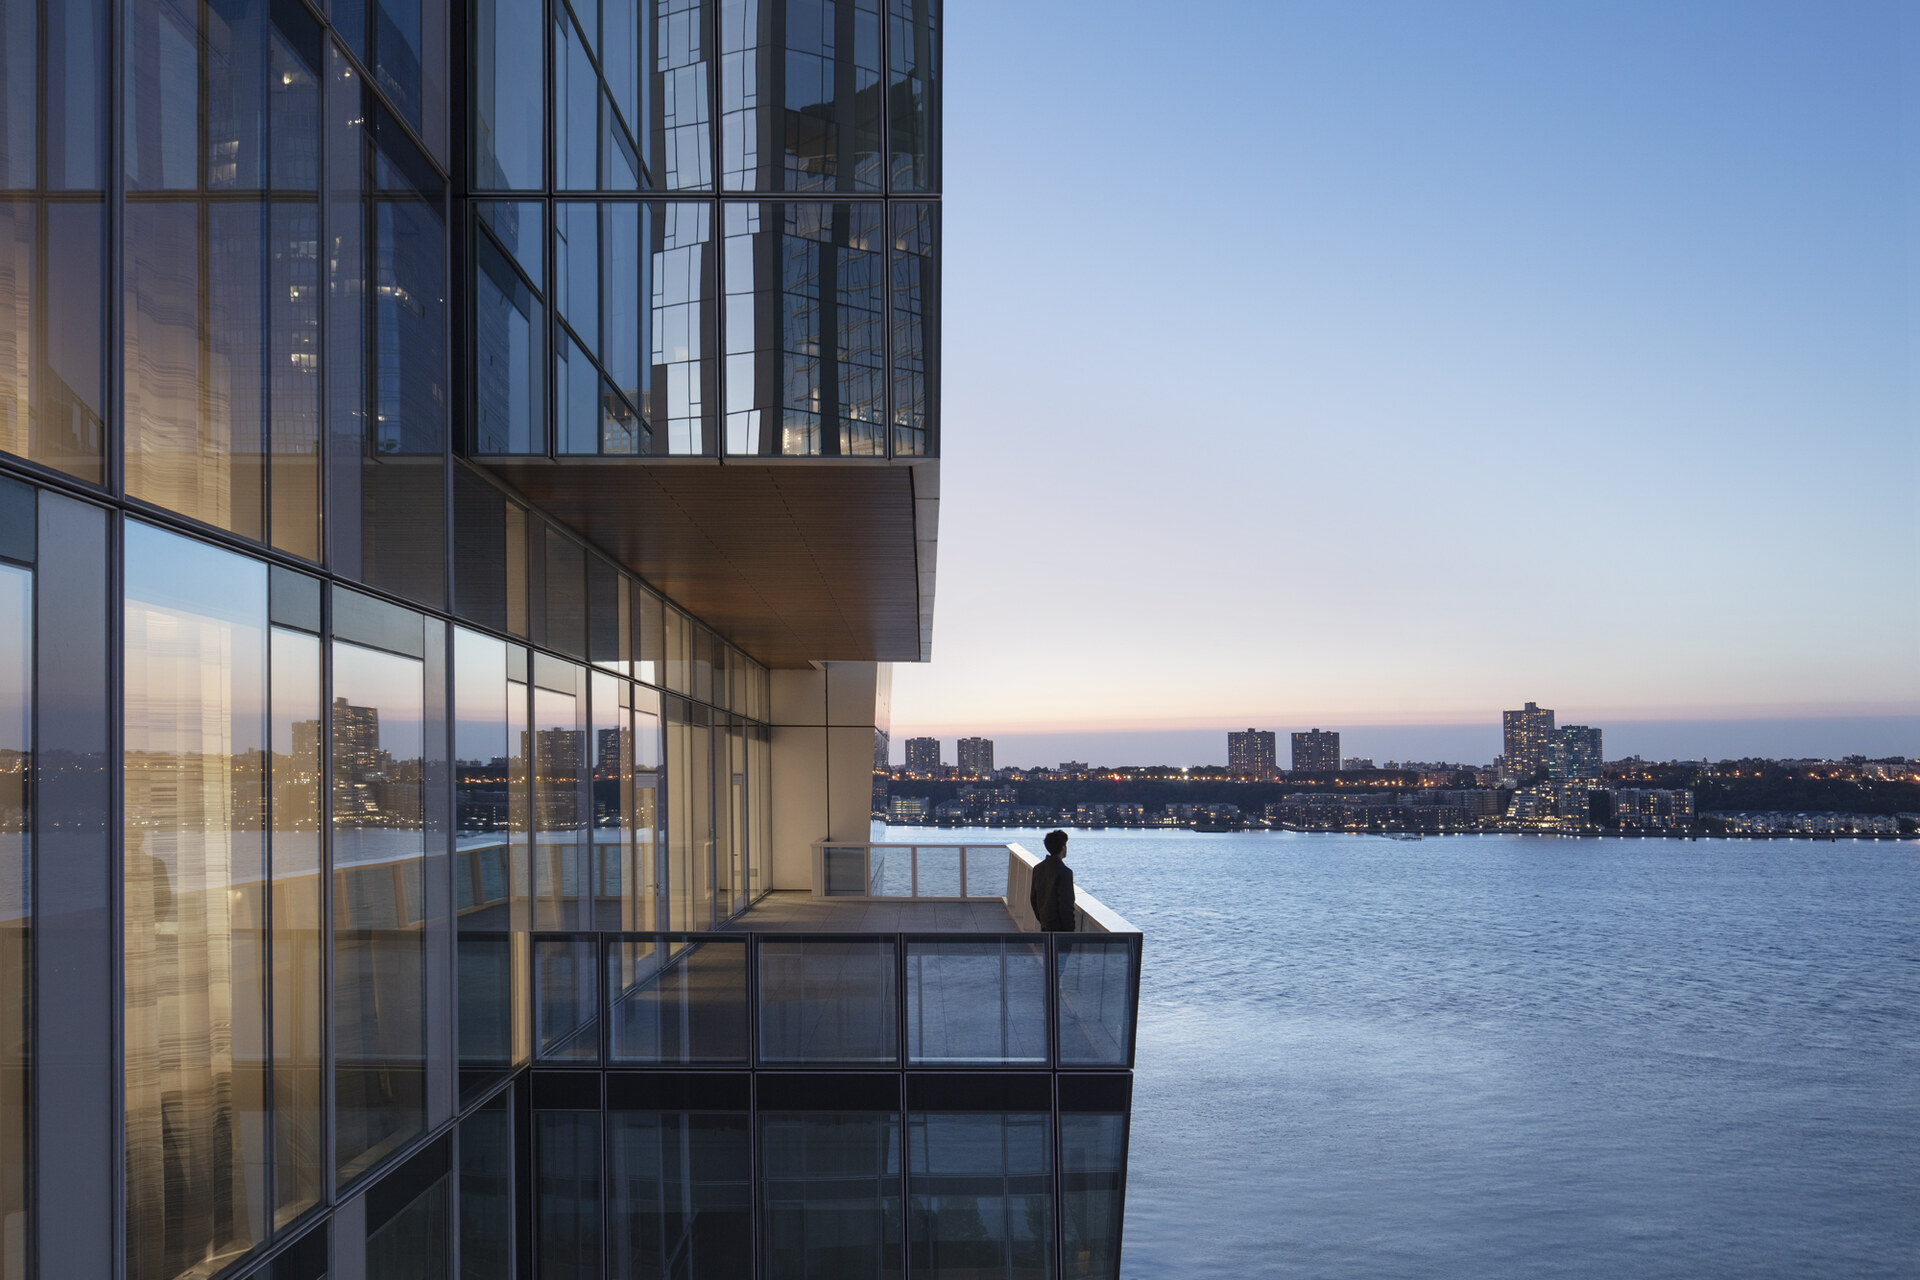 Contemplation at dusk: a lone figure stands on a modern balcony overlooking a tranquil waterfront cityscape as the evening light fades.